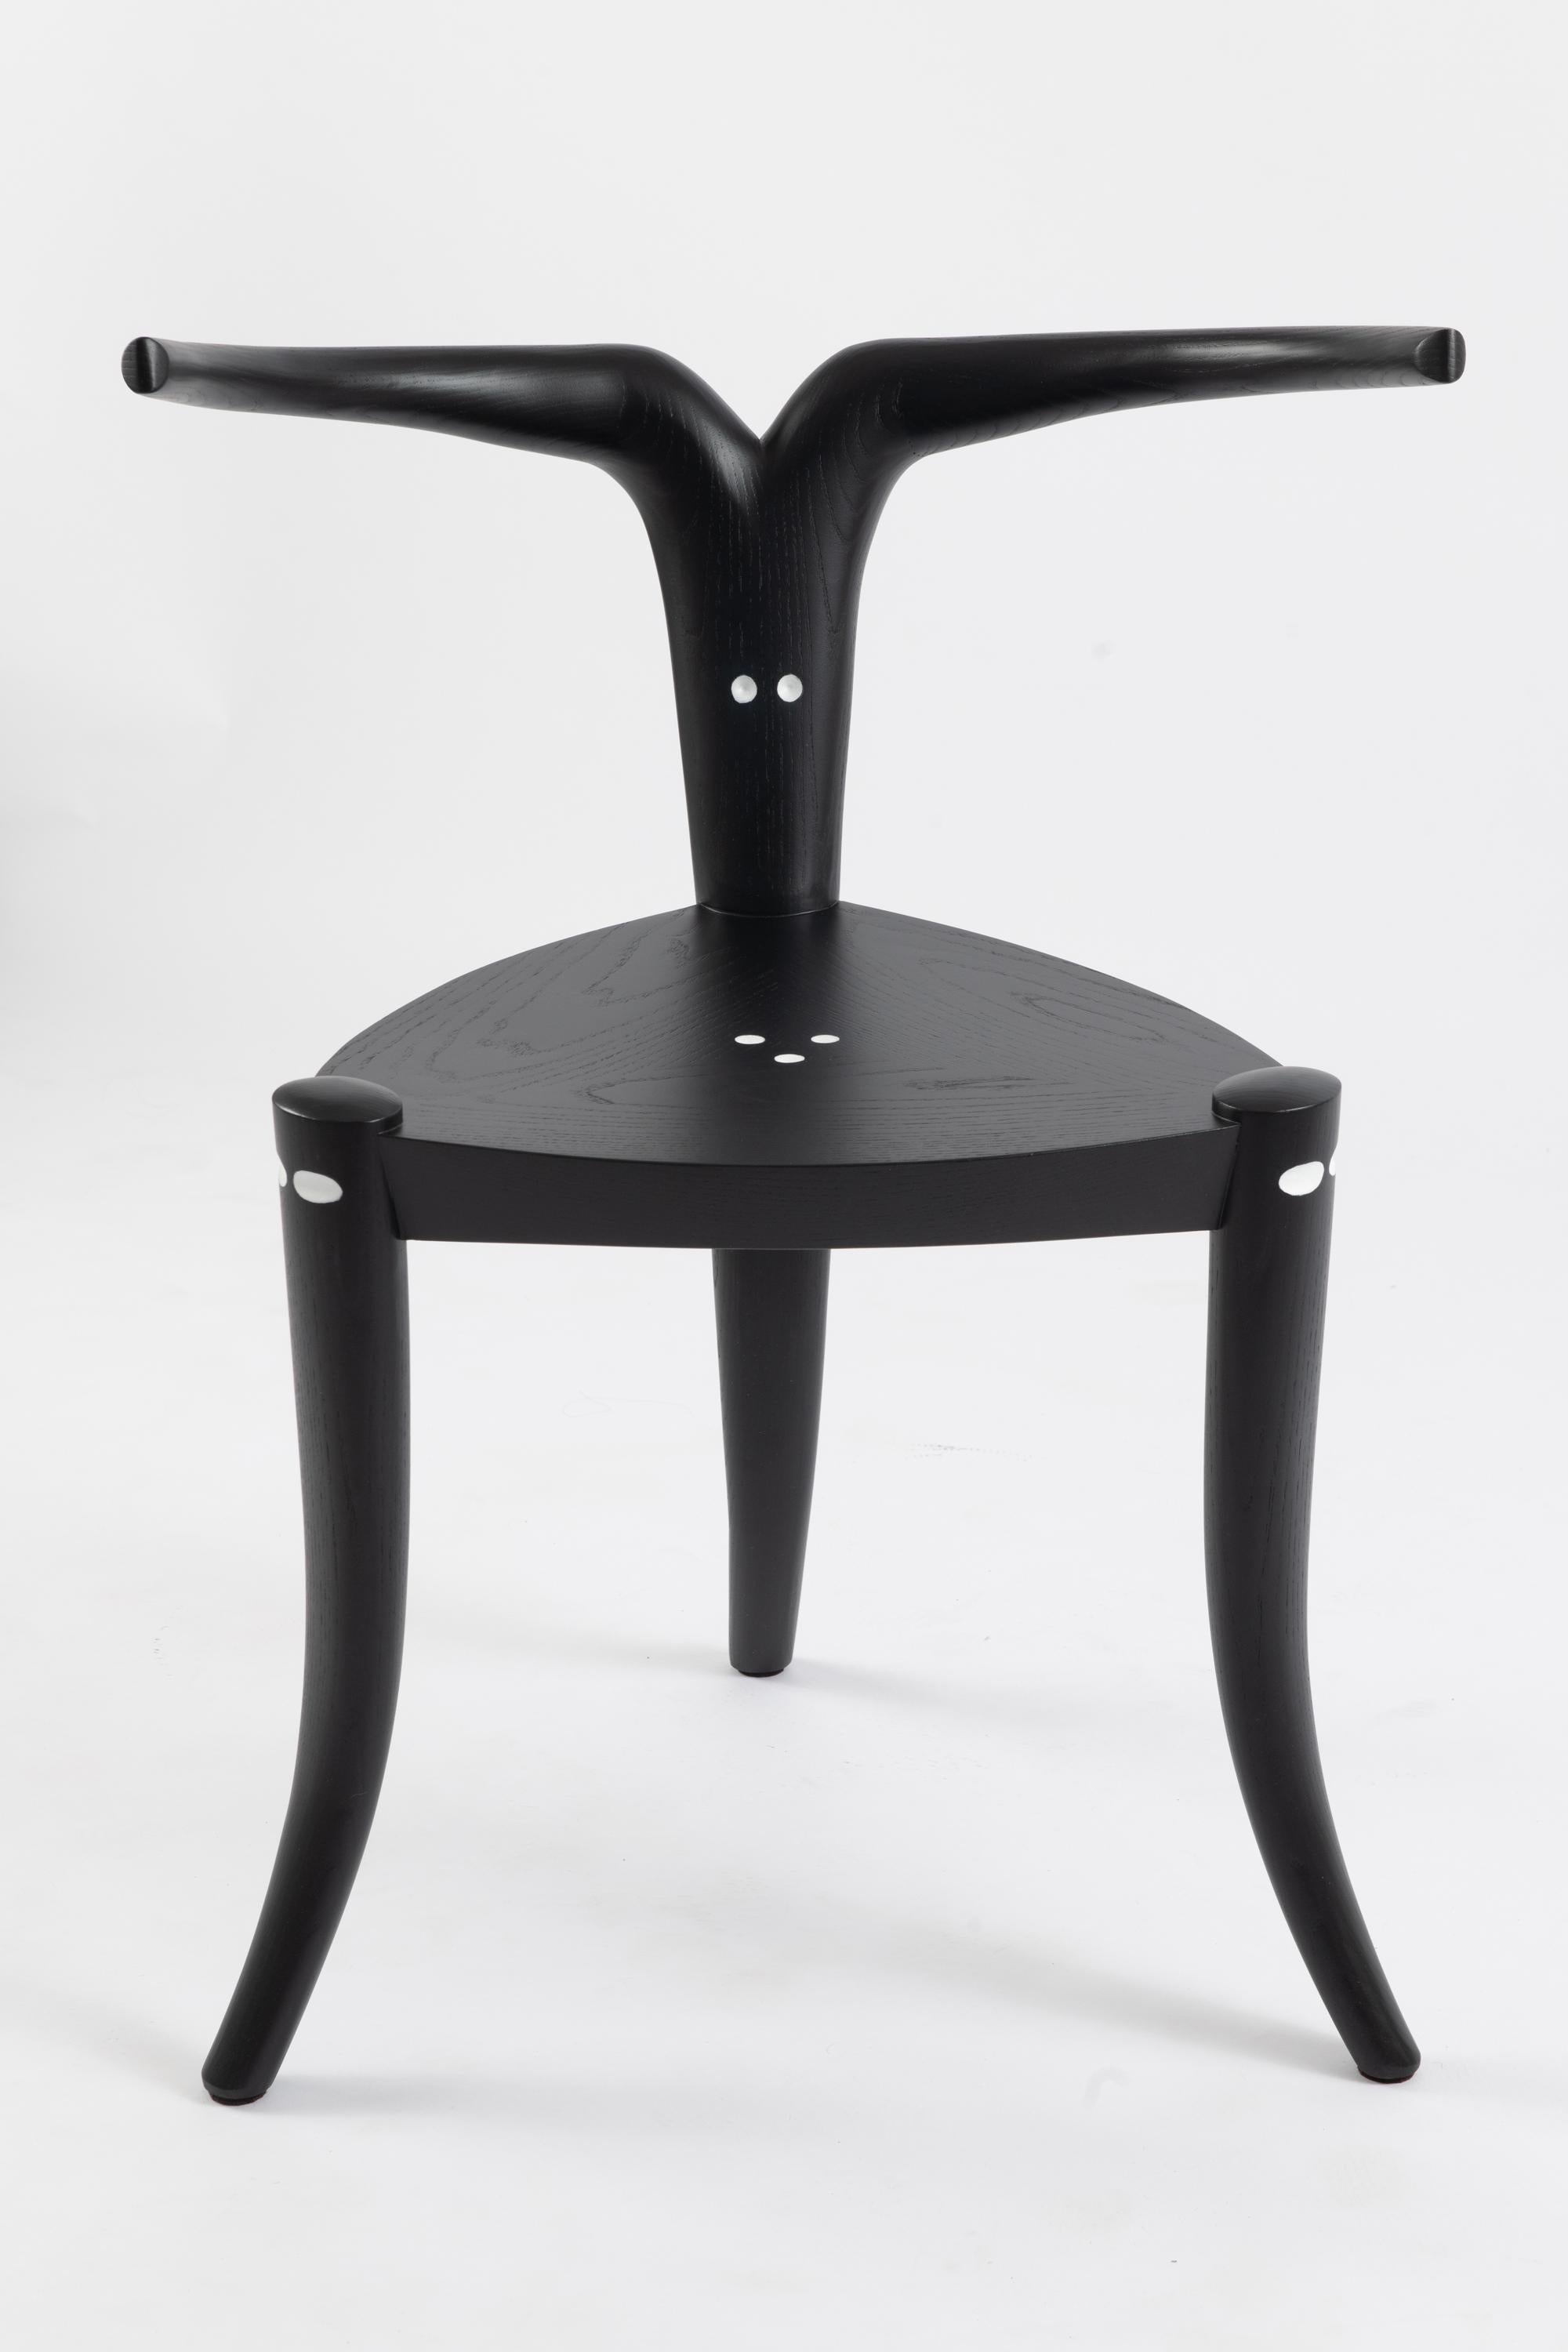 Jomo Tariku
Nyala Chair, 2022
Ebonized ash with carved and painted detail
Measures: 30 x 23.5 x 20 in
Edition of 18
 
Inspired by the shy and elusive mountain antelope from the Bale Mountains of East Africa, the hand-carved armrests and legs